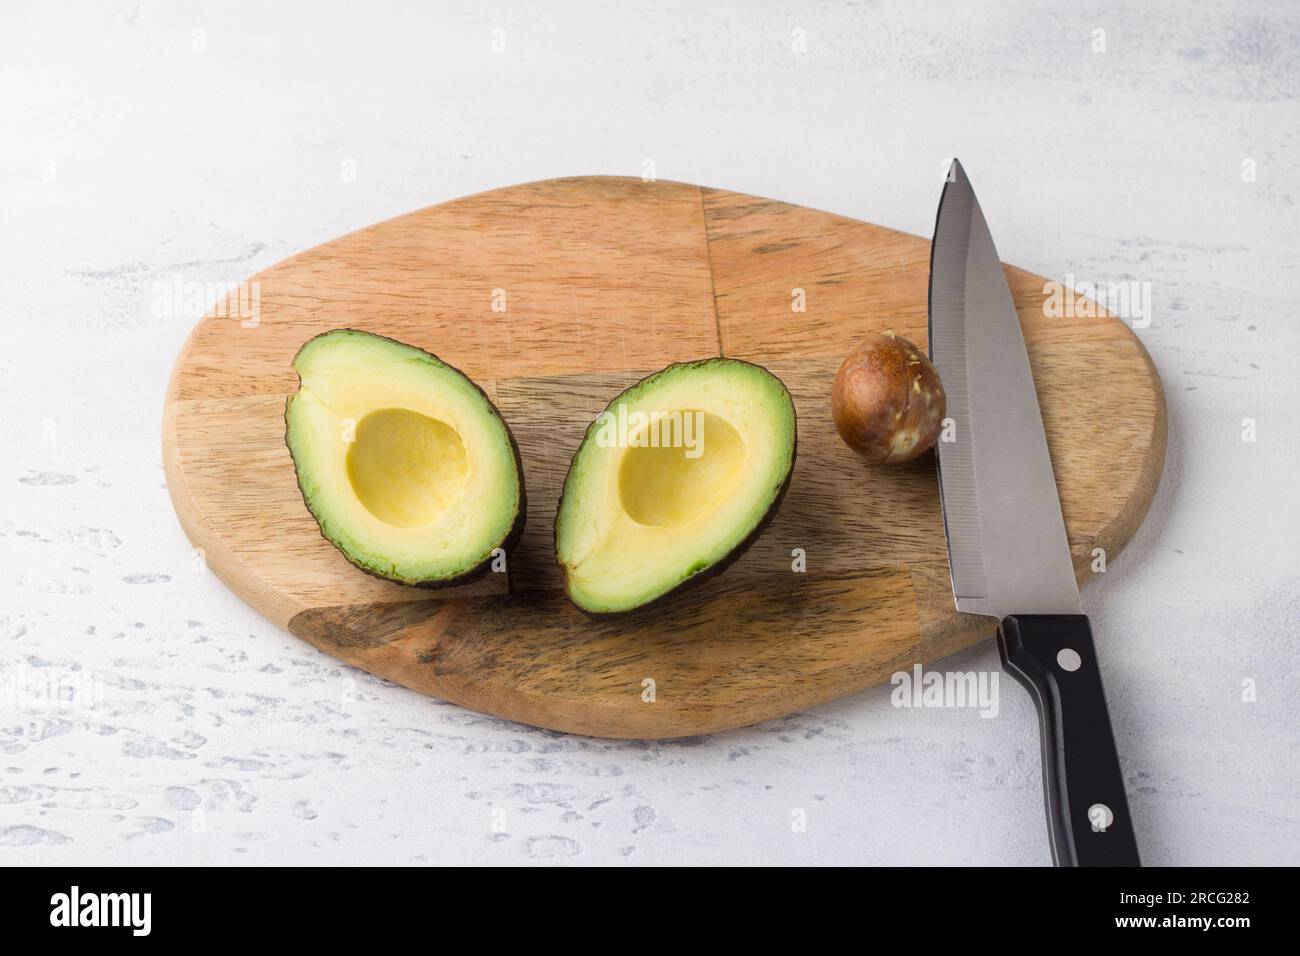 https://c8.alamy.com/comp/2RCG282/fresh-avocado-cut-in-half-and-avocado-pit-with-a-knife-on-a-wooden-board-on-a-light-gray-background-top-view-2RCG282.jpg